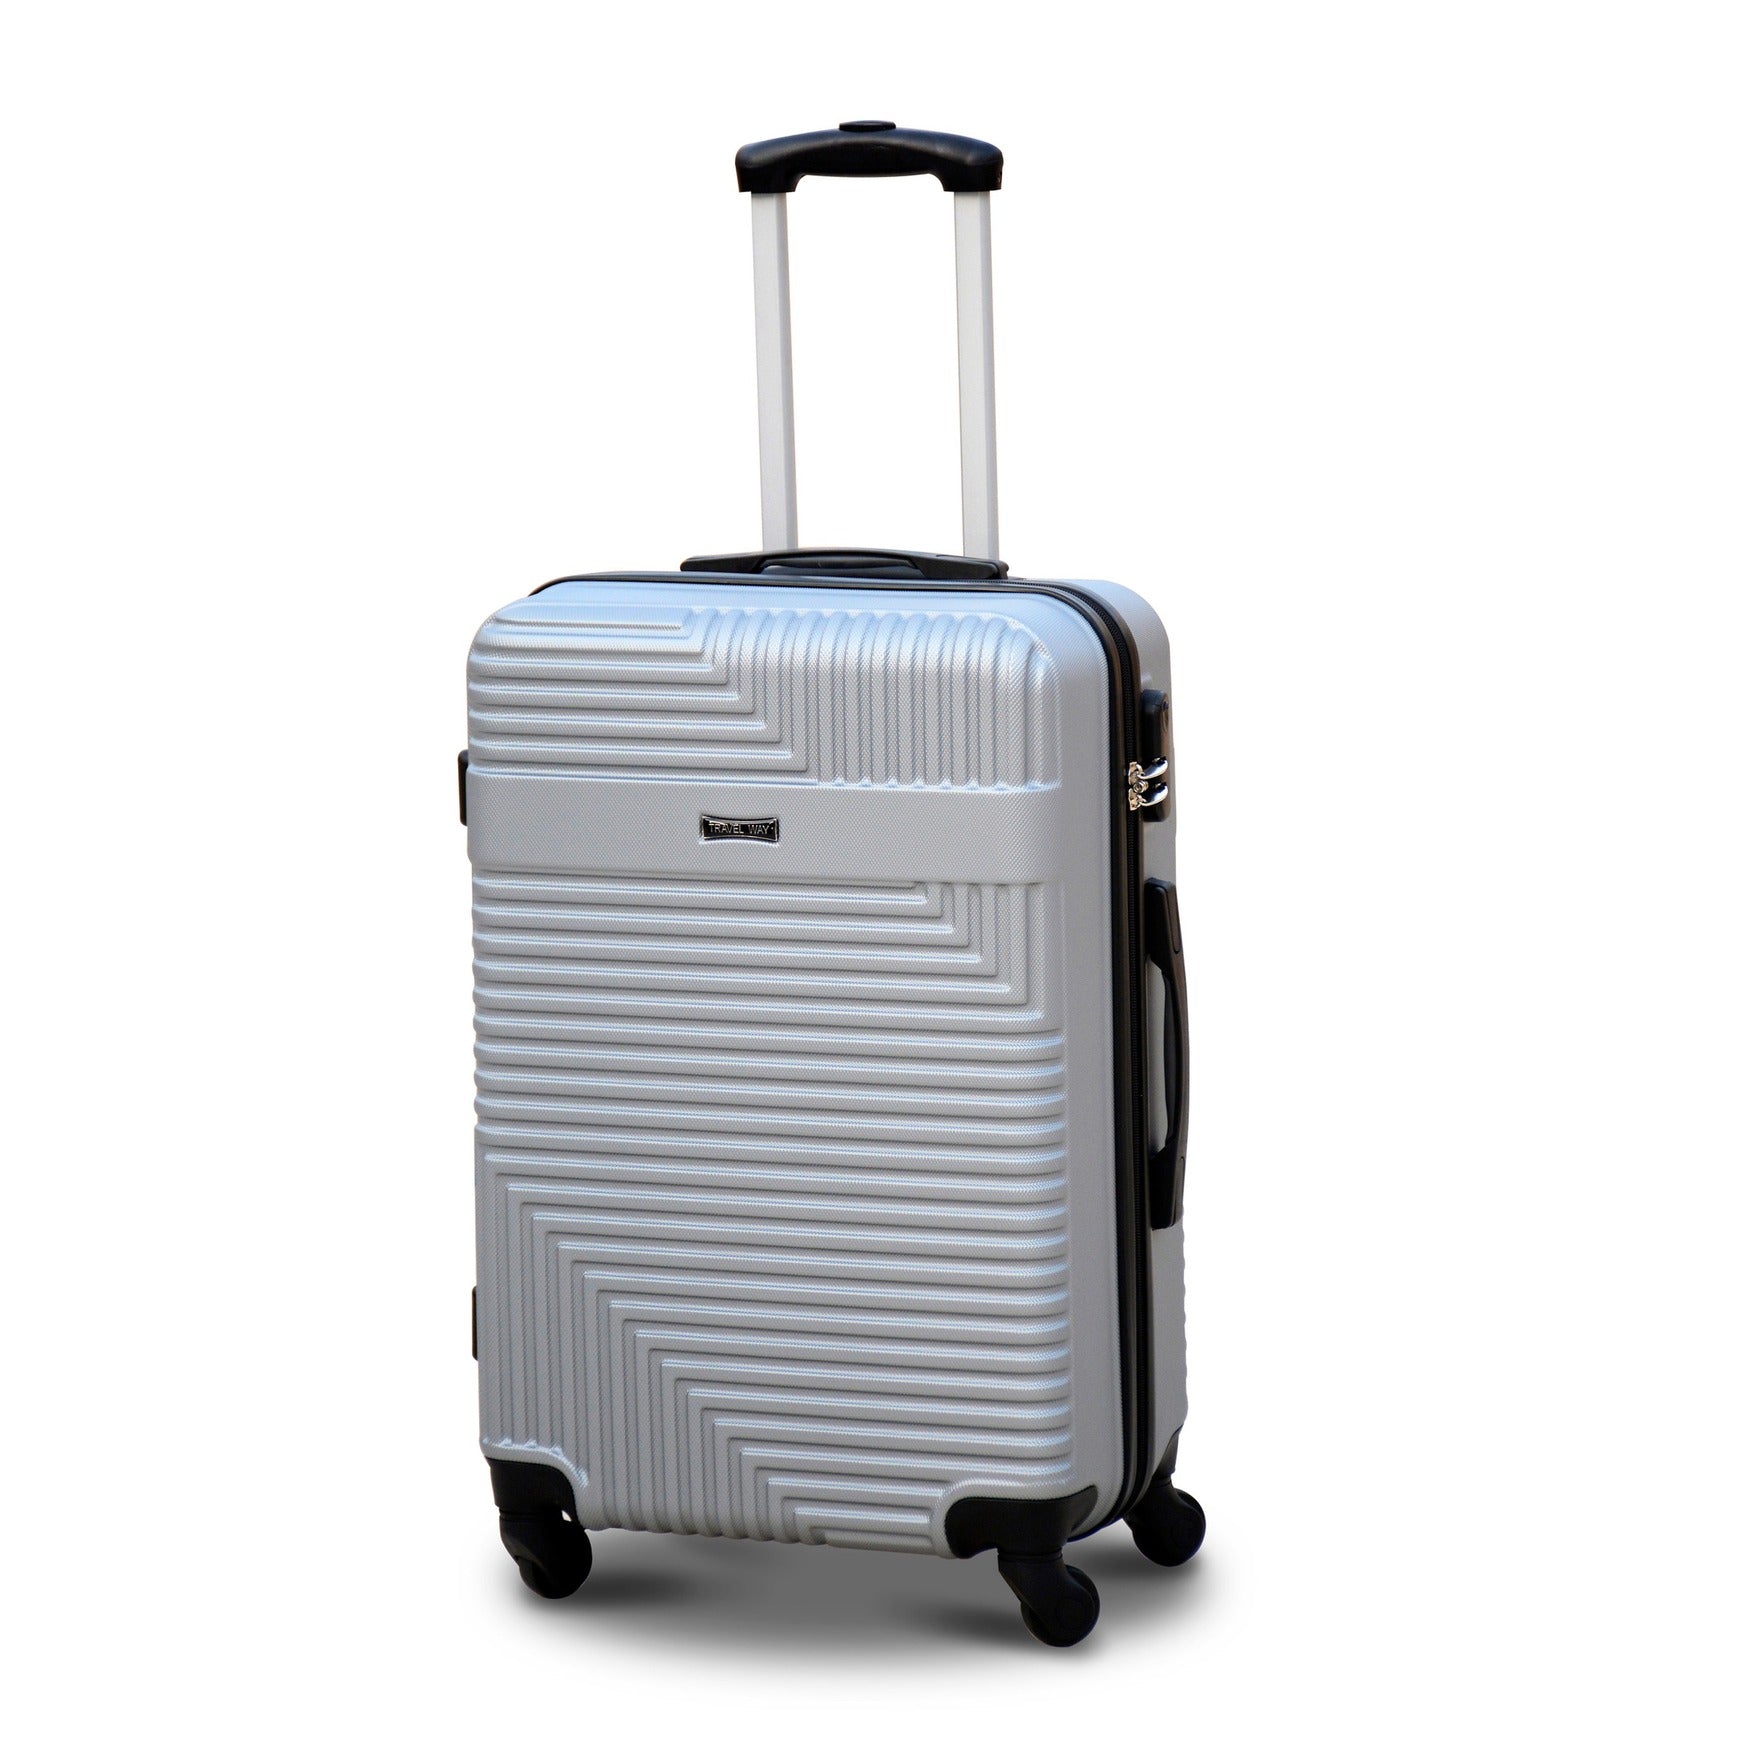 24" Silver Colour Travel Way ABS Luggage Lightweight Hard Case Trolley Bag